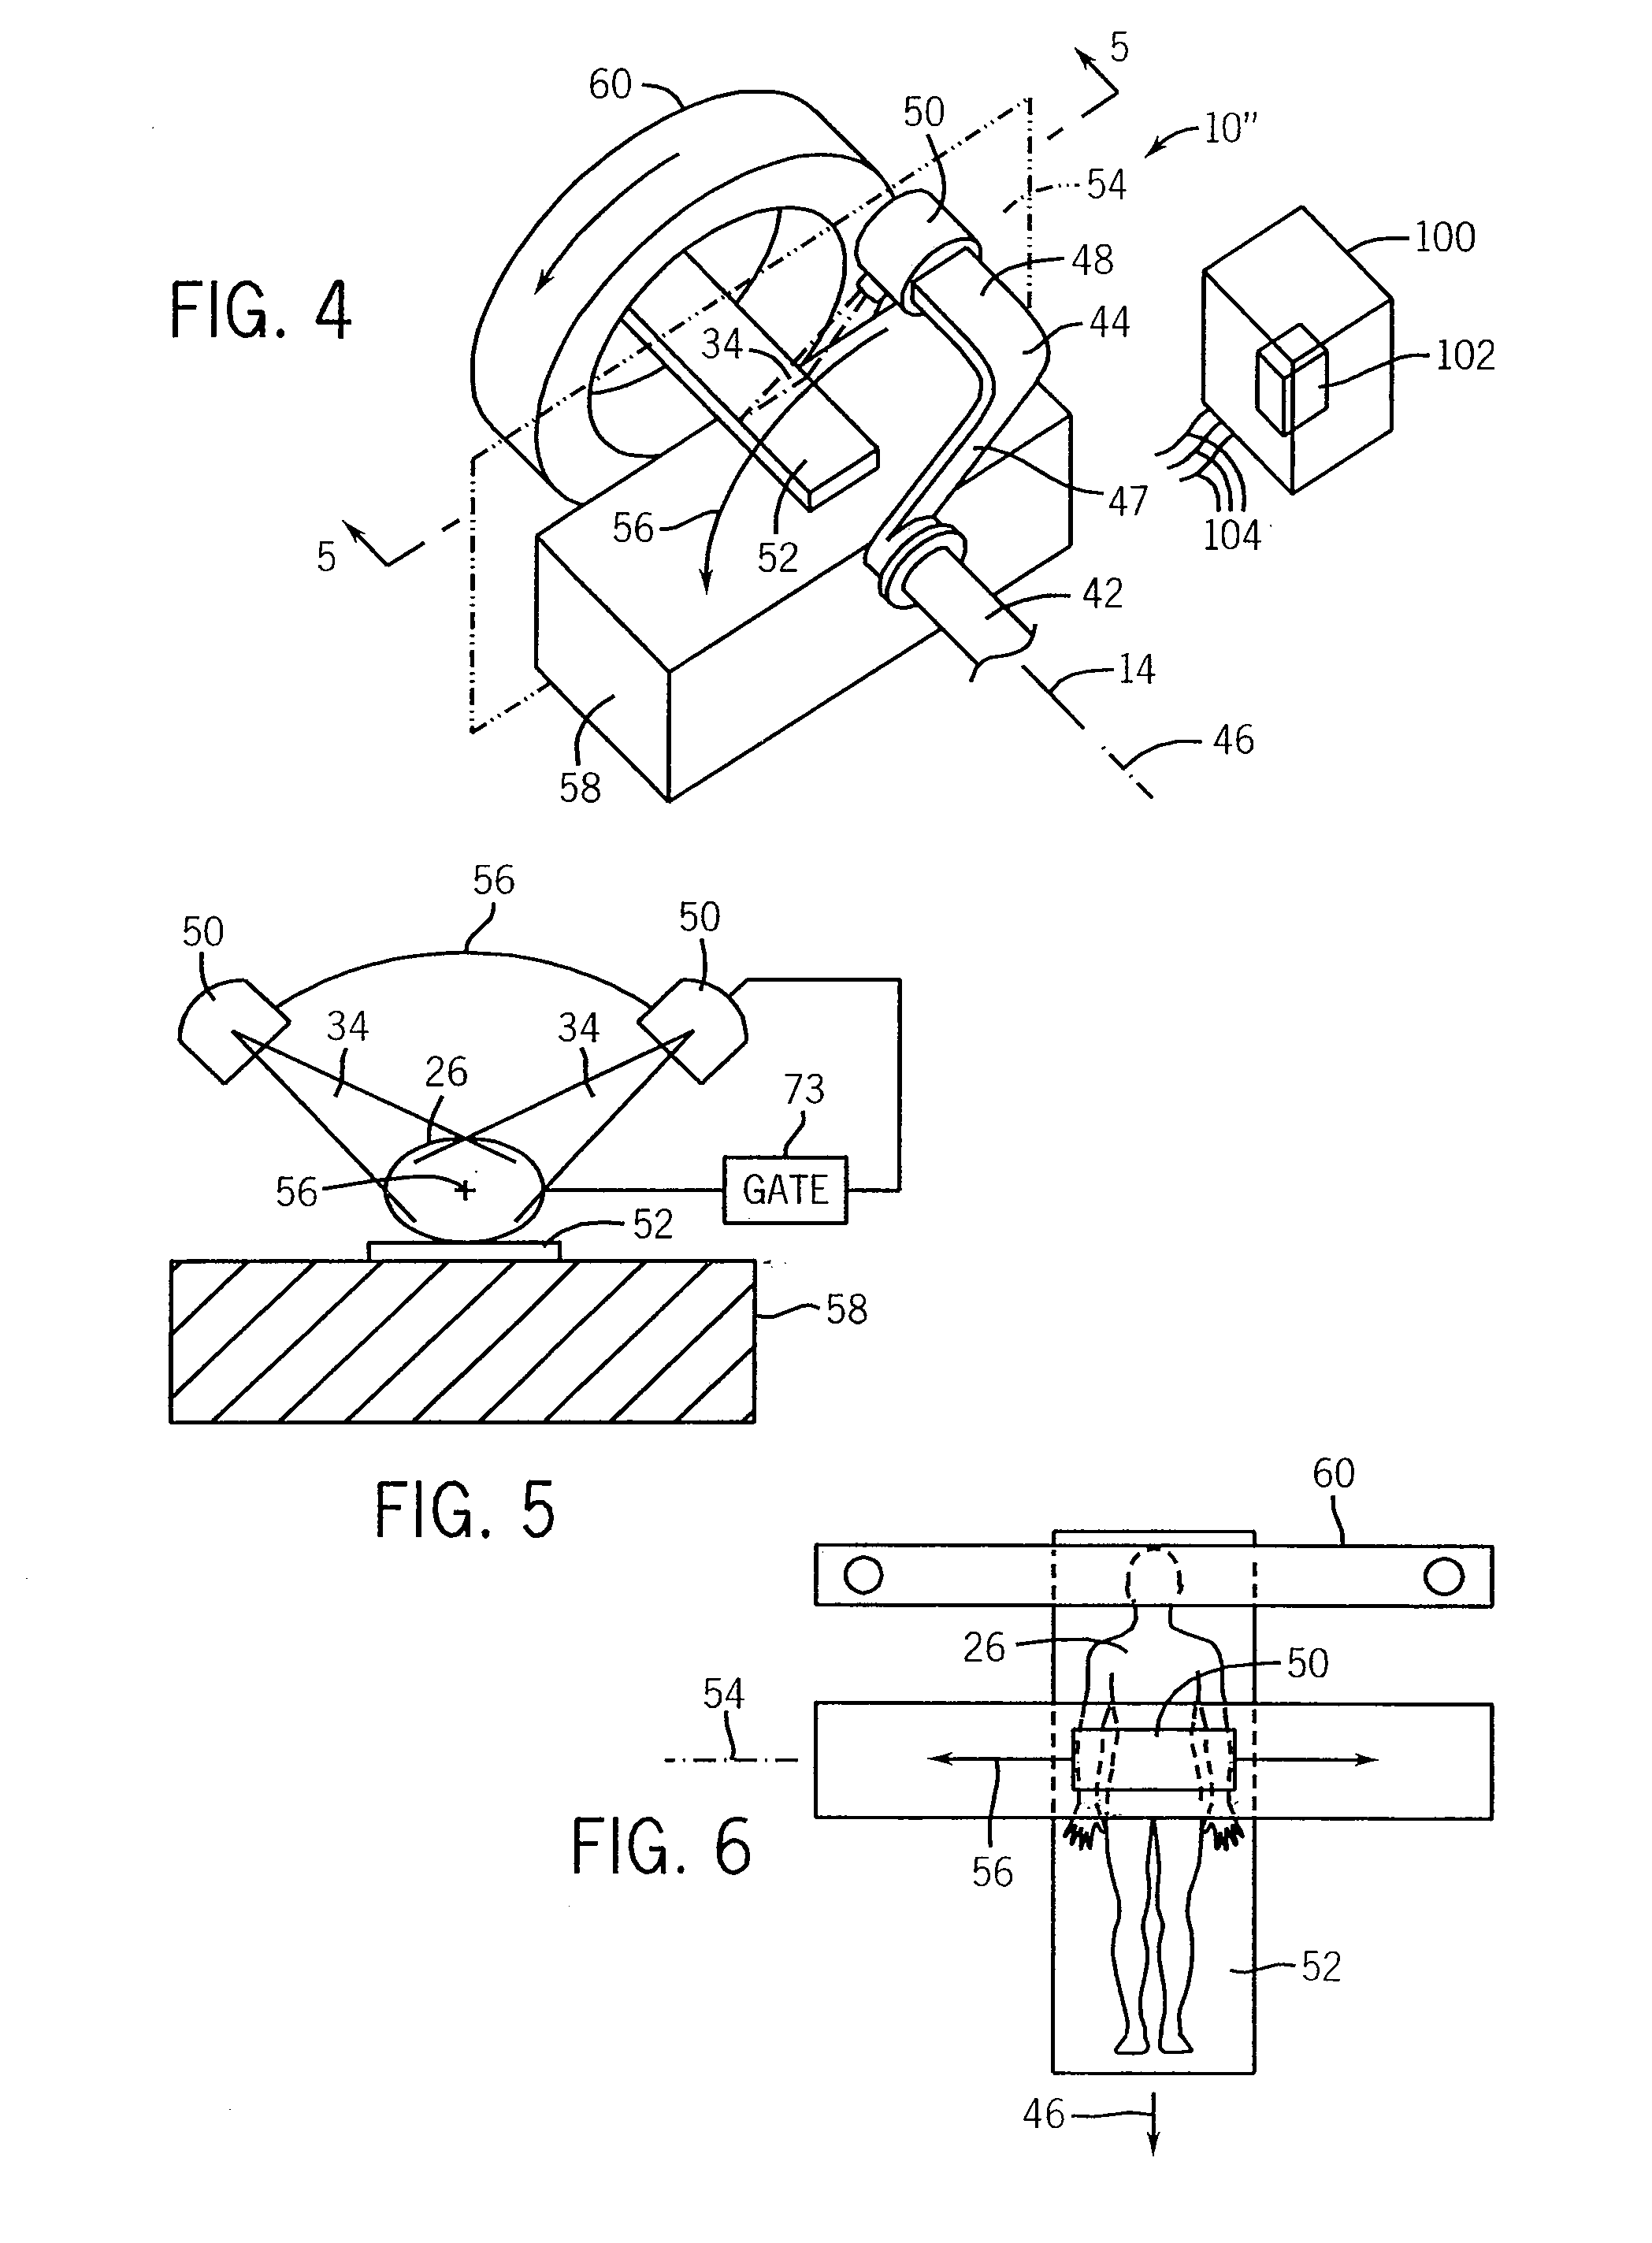 Heavy ion radiation therapy system with stair-step modulation